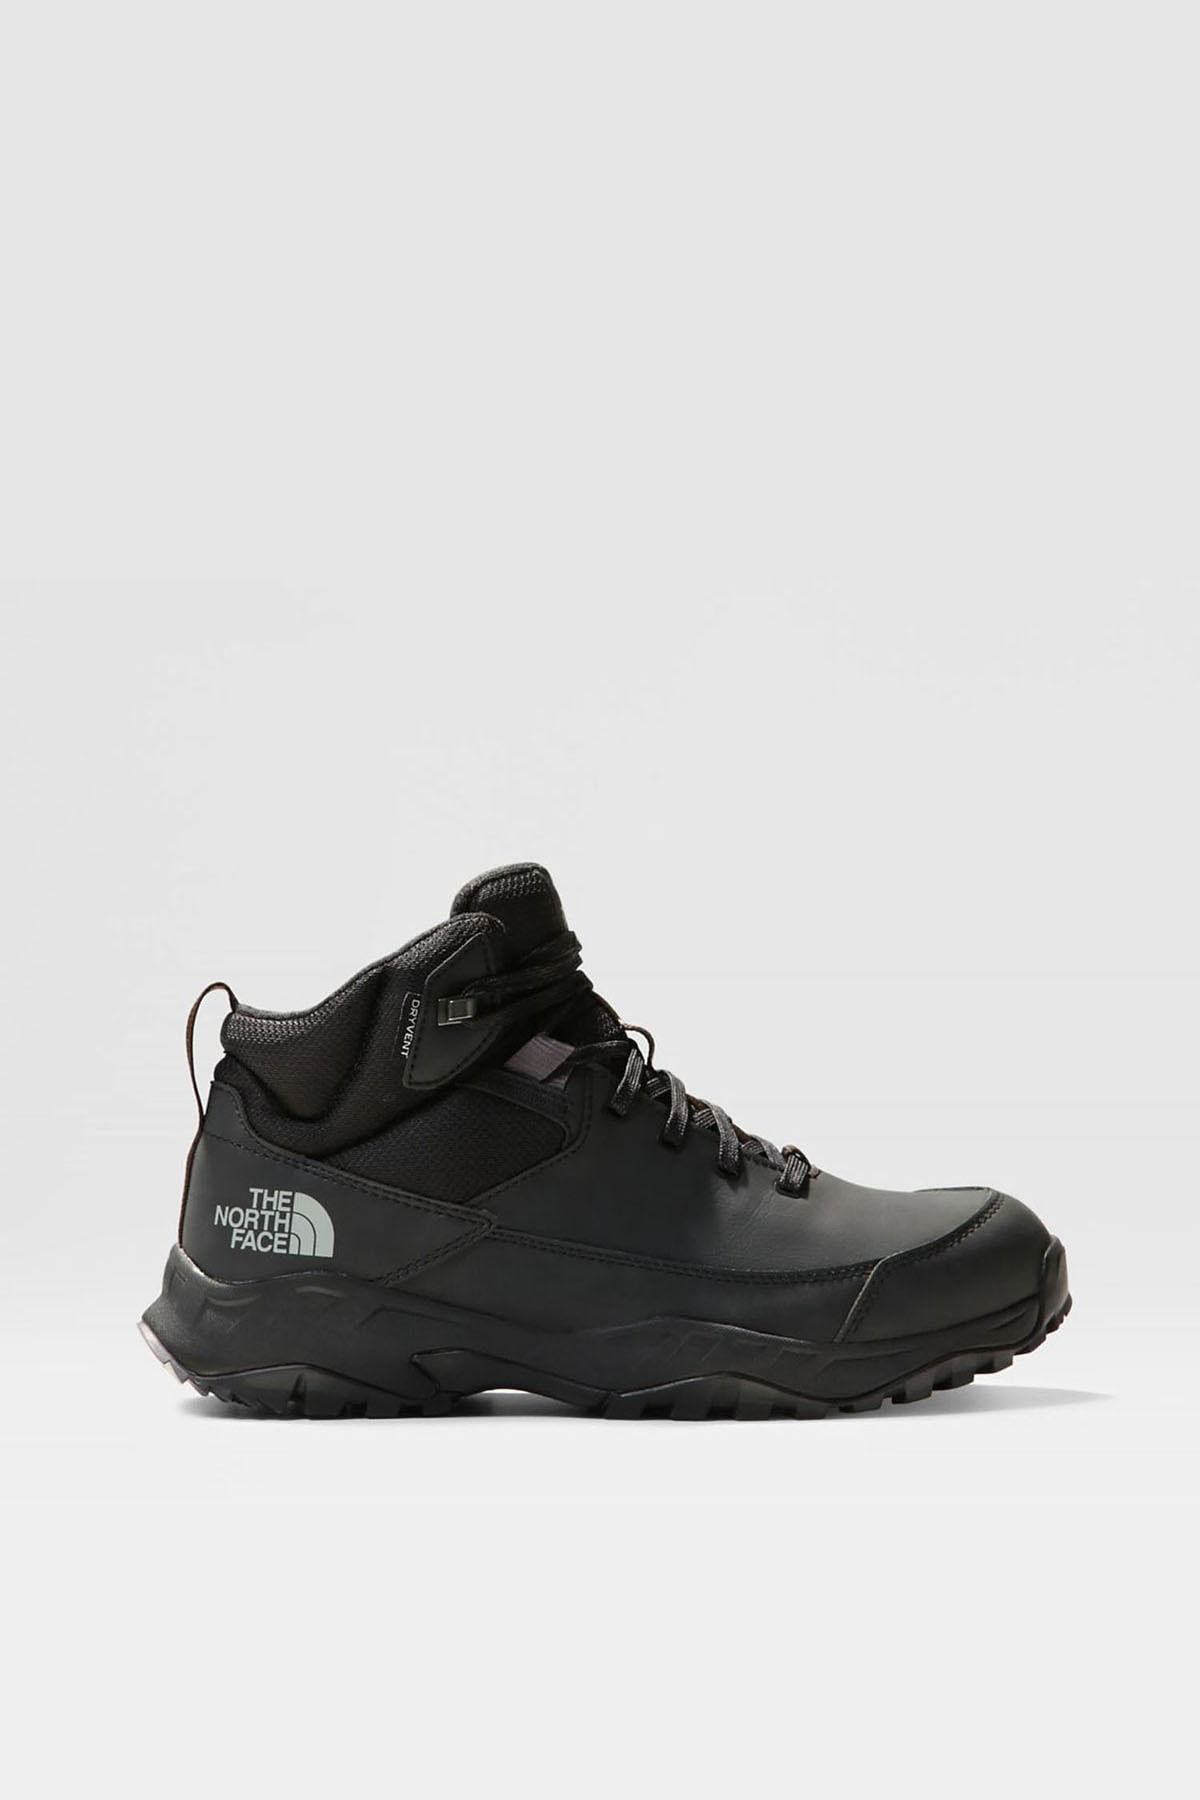 The North Face The Norht Face Erkek Outdoor Bot Storm Strike Wp Nf0a7w4gkt01